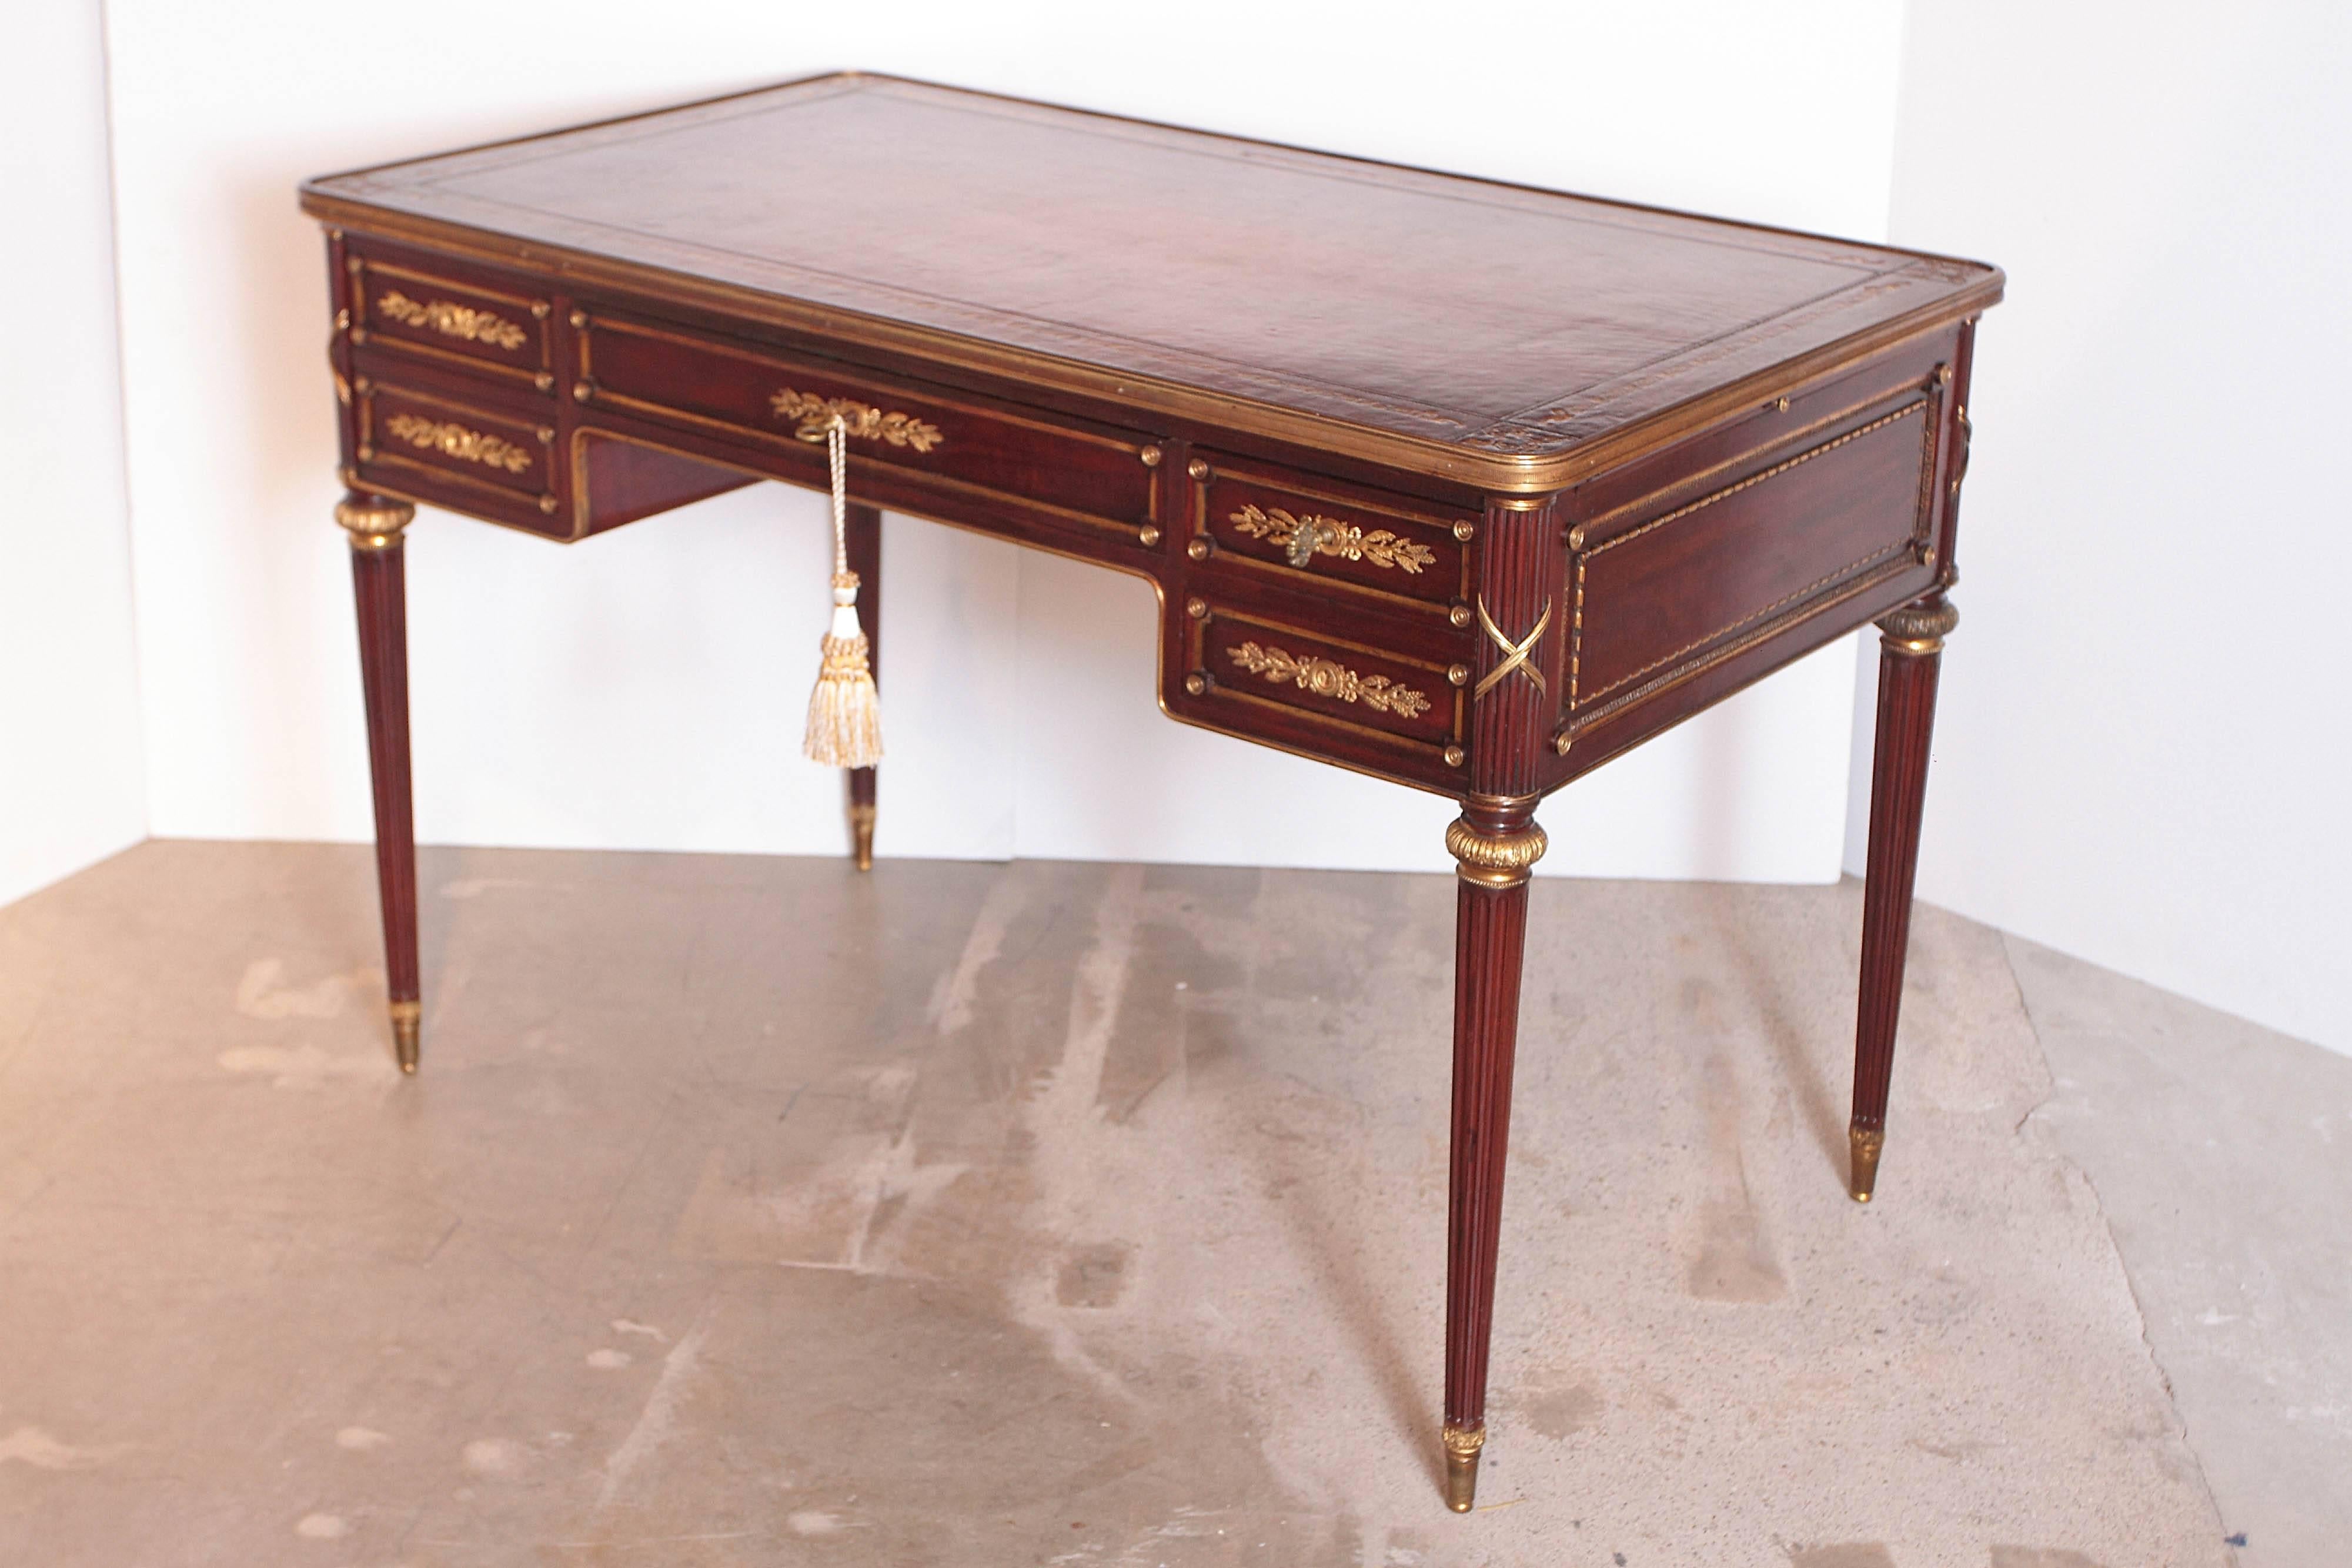 Fine French late 19th century Louis XVI leather top writing desk. Gilt bronze detailing. Two leather pull outs. 
Signed in the lock plate A Chevrie Paris.